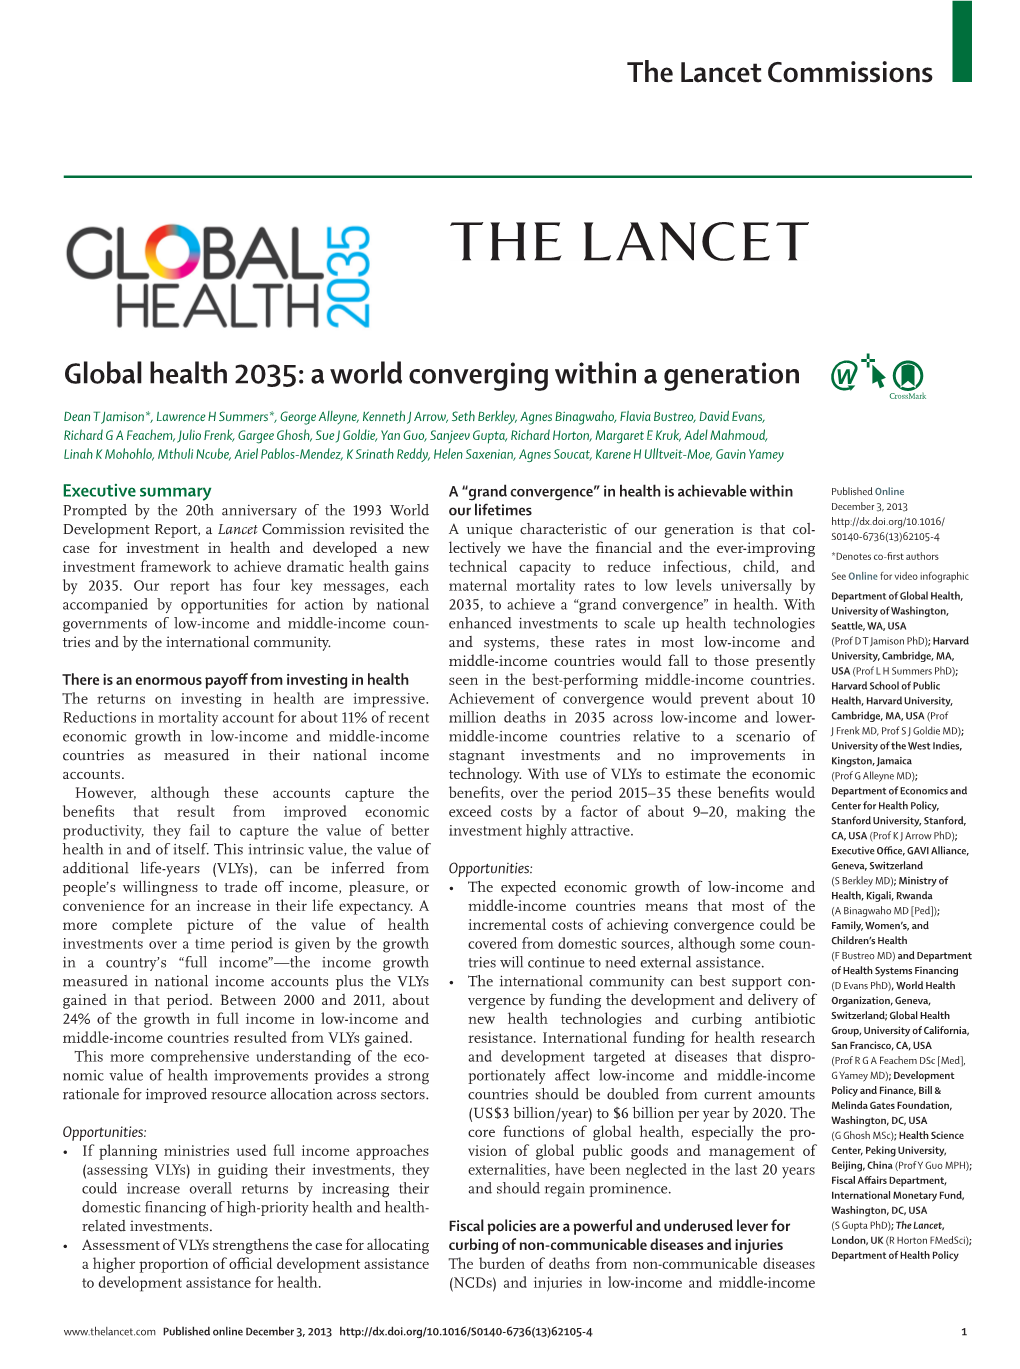 Global Health 2035: a World Converging Within a Generation